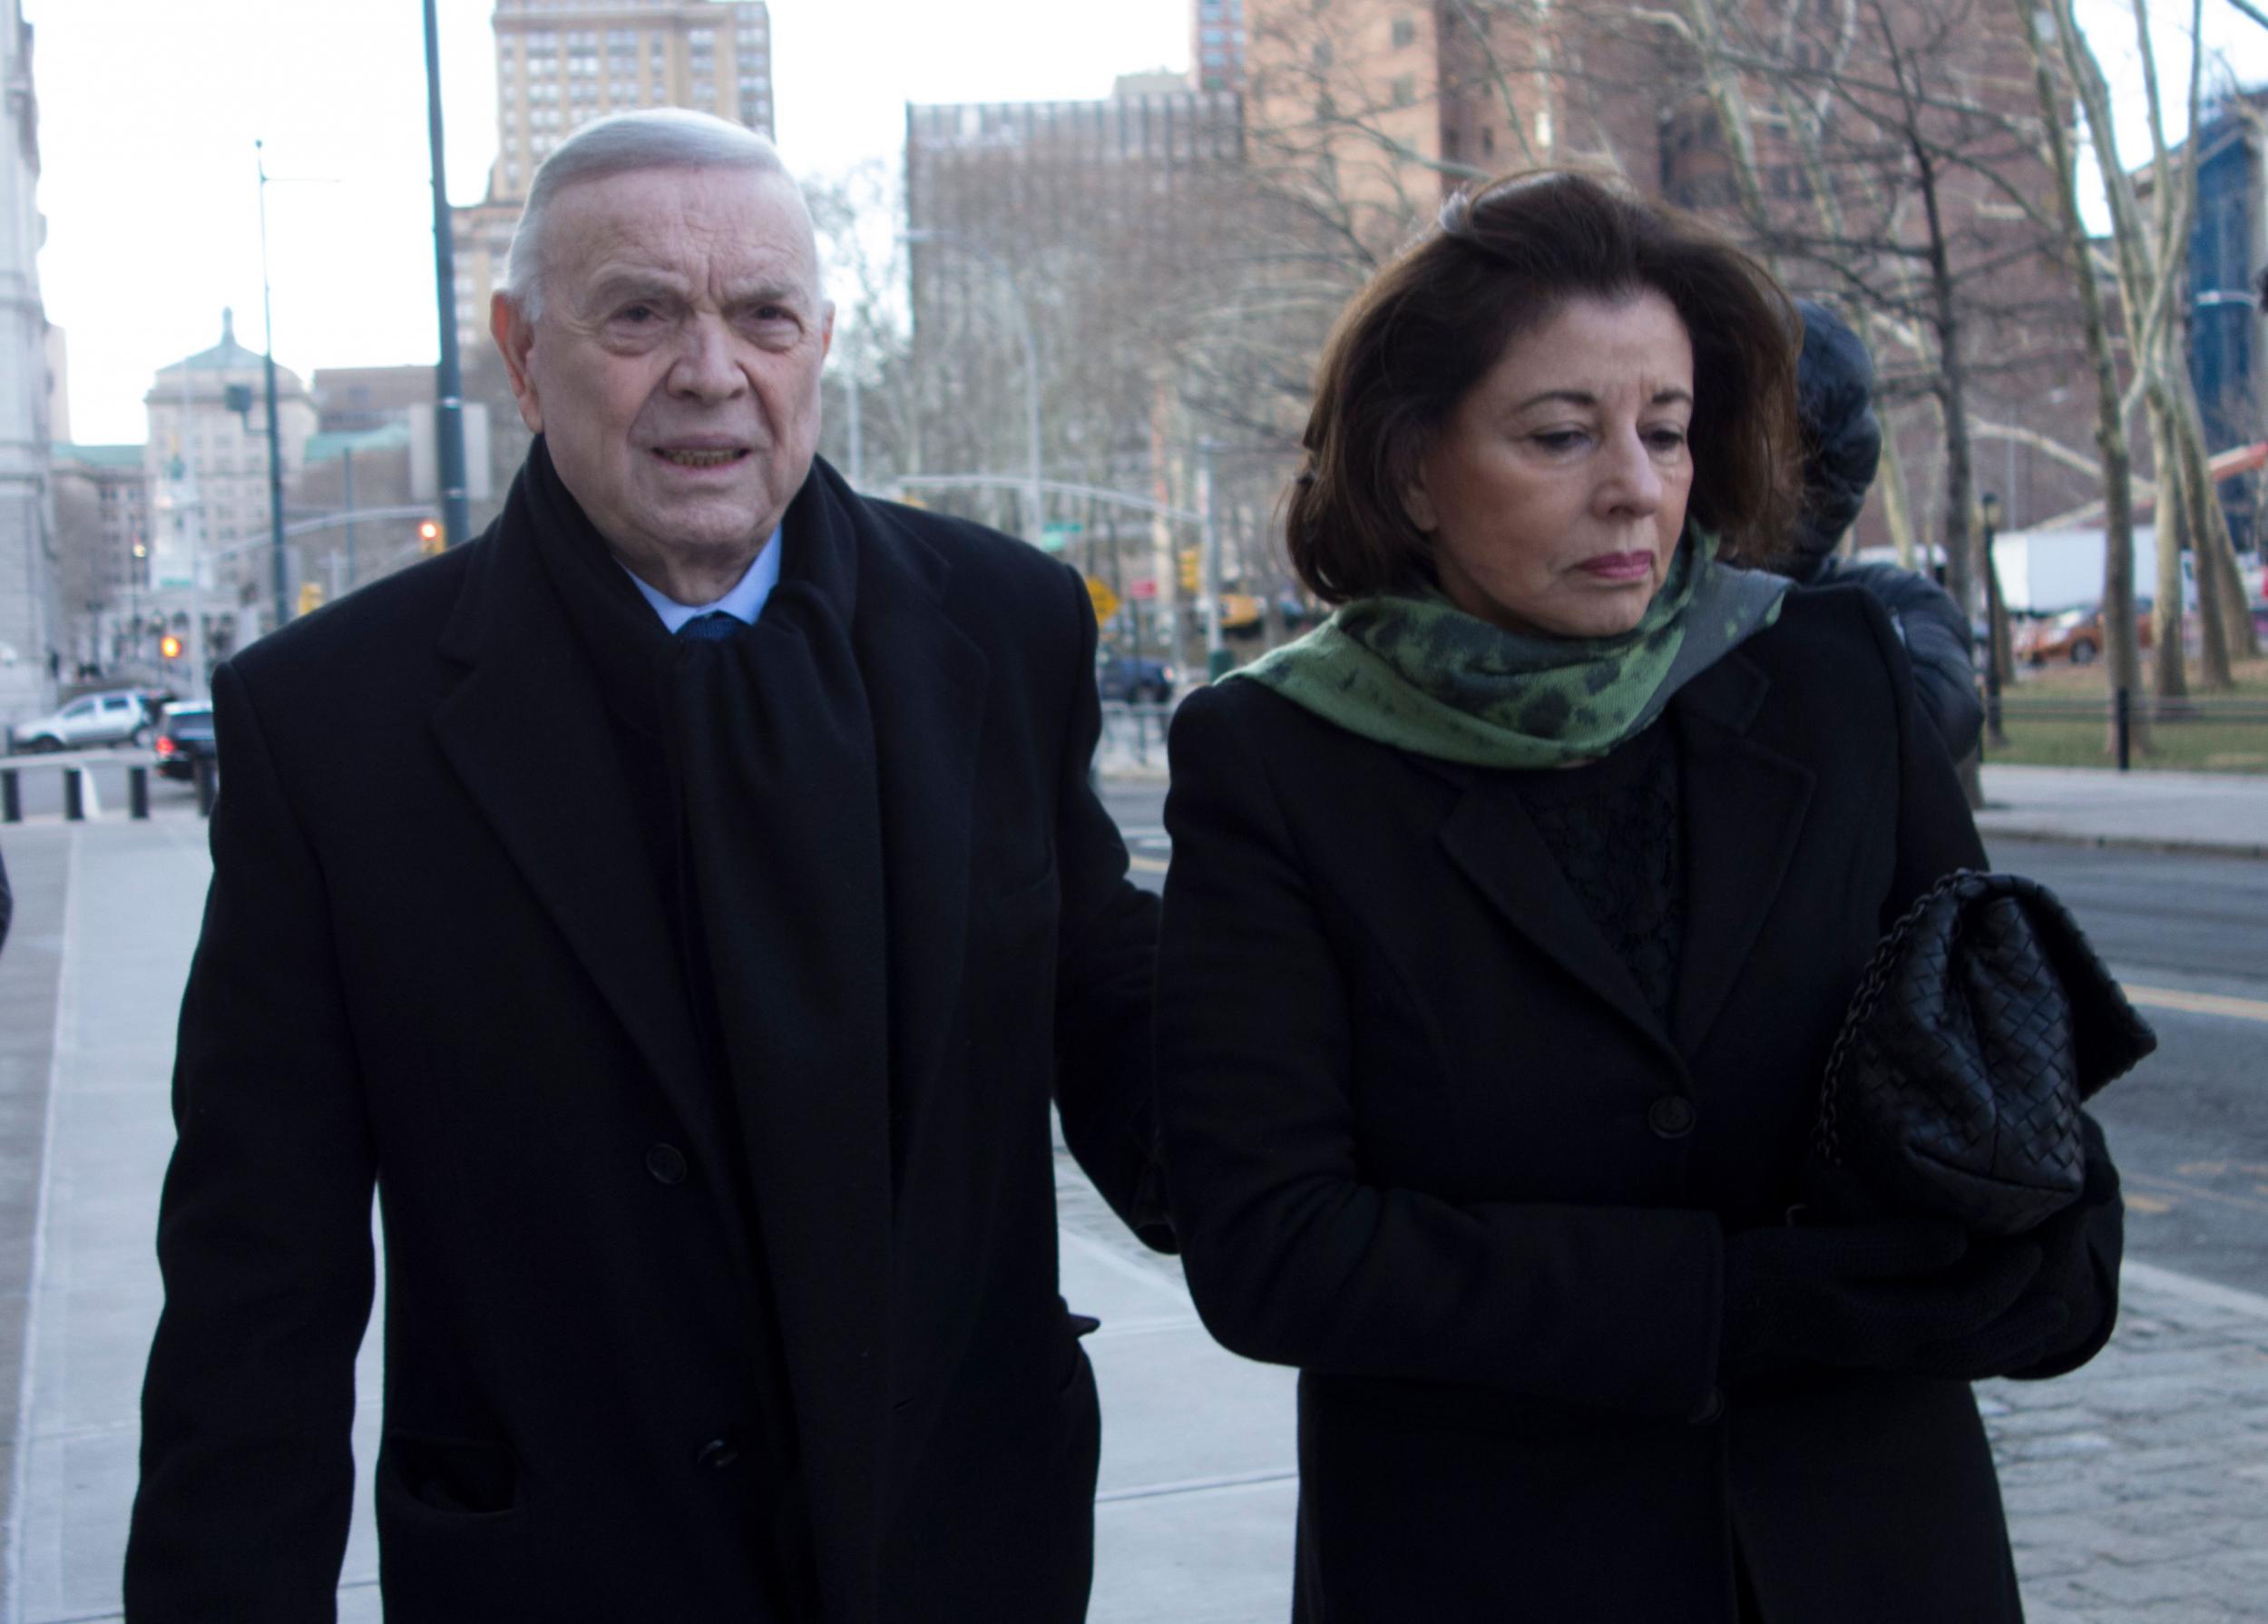 Jose Maria Marin was convicted of racketeering conspiracy